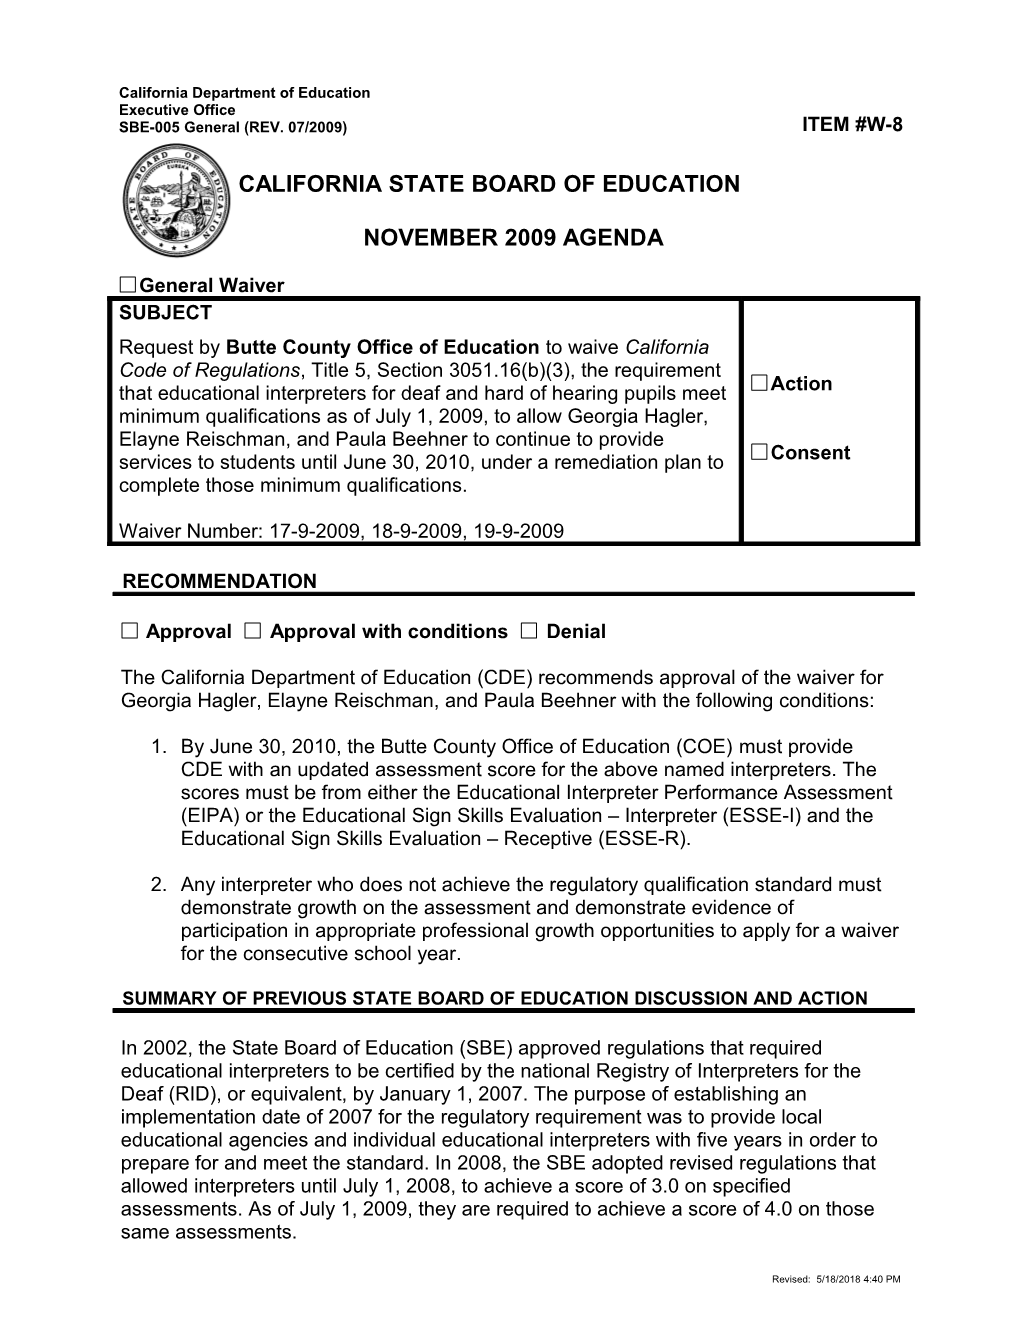 November 2009 Waiver Item W8 - Meeting Agendas (CA State Board of Education)